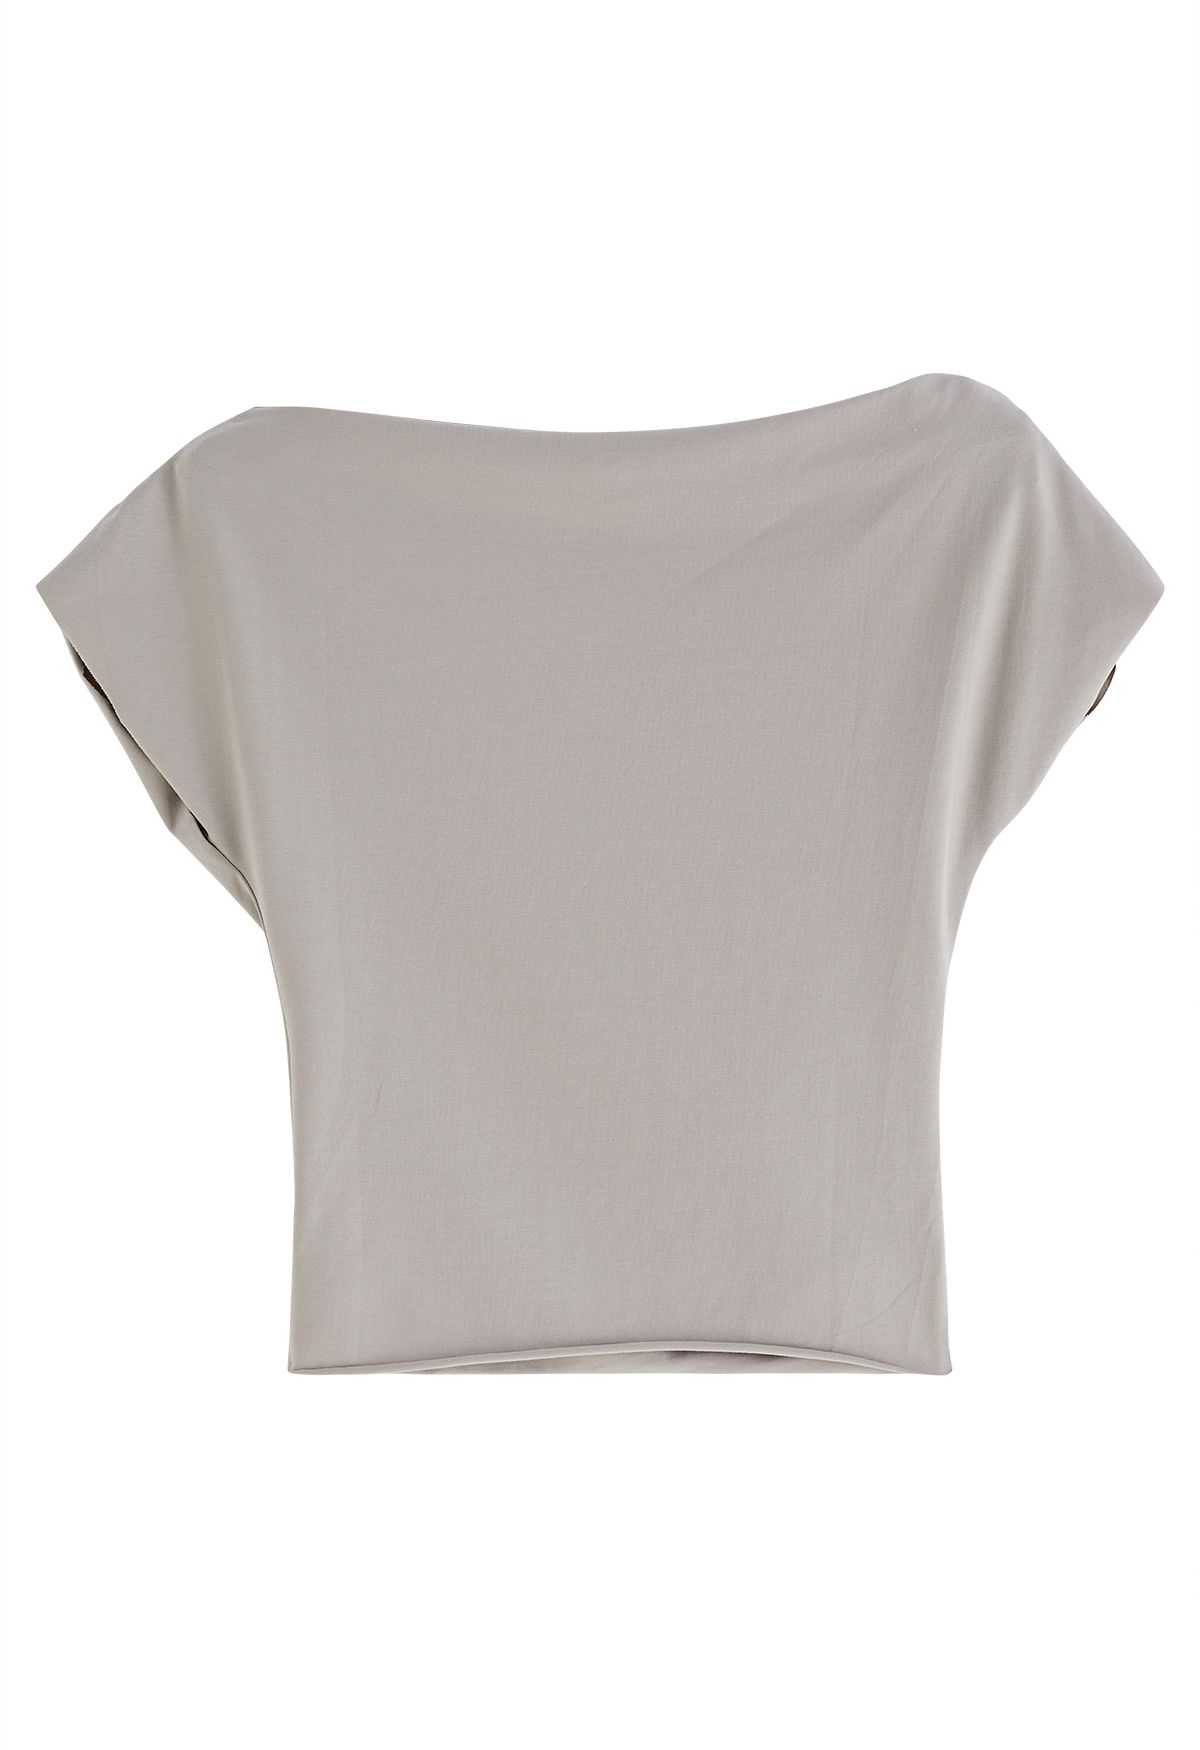 Asymmetric Boat Neck Ruched Top in Taupe